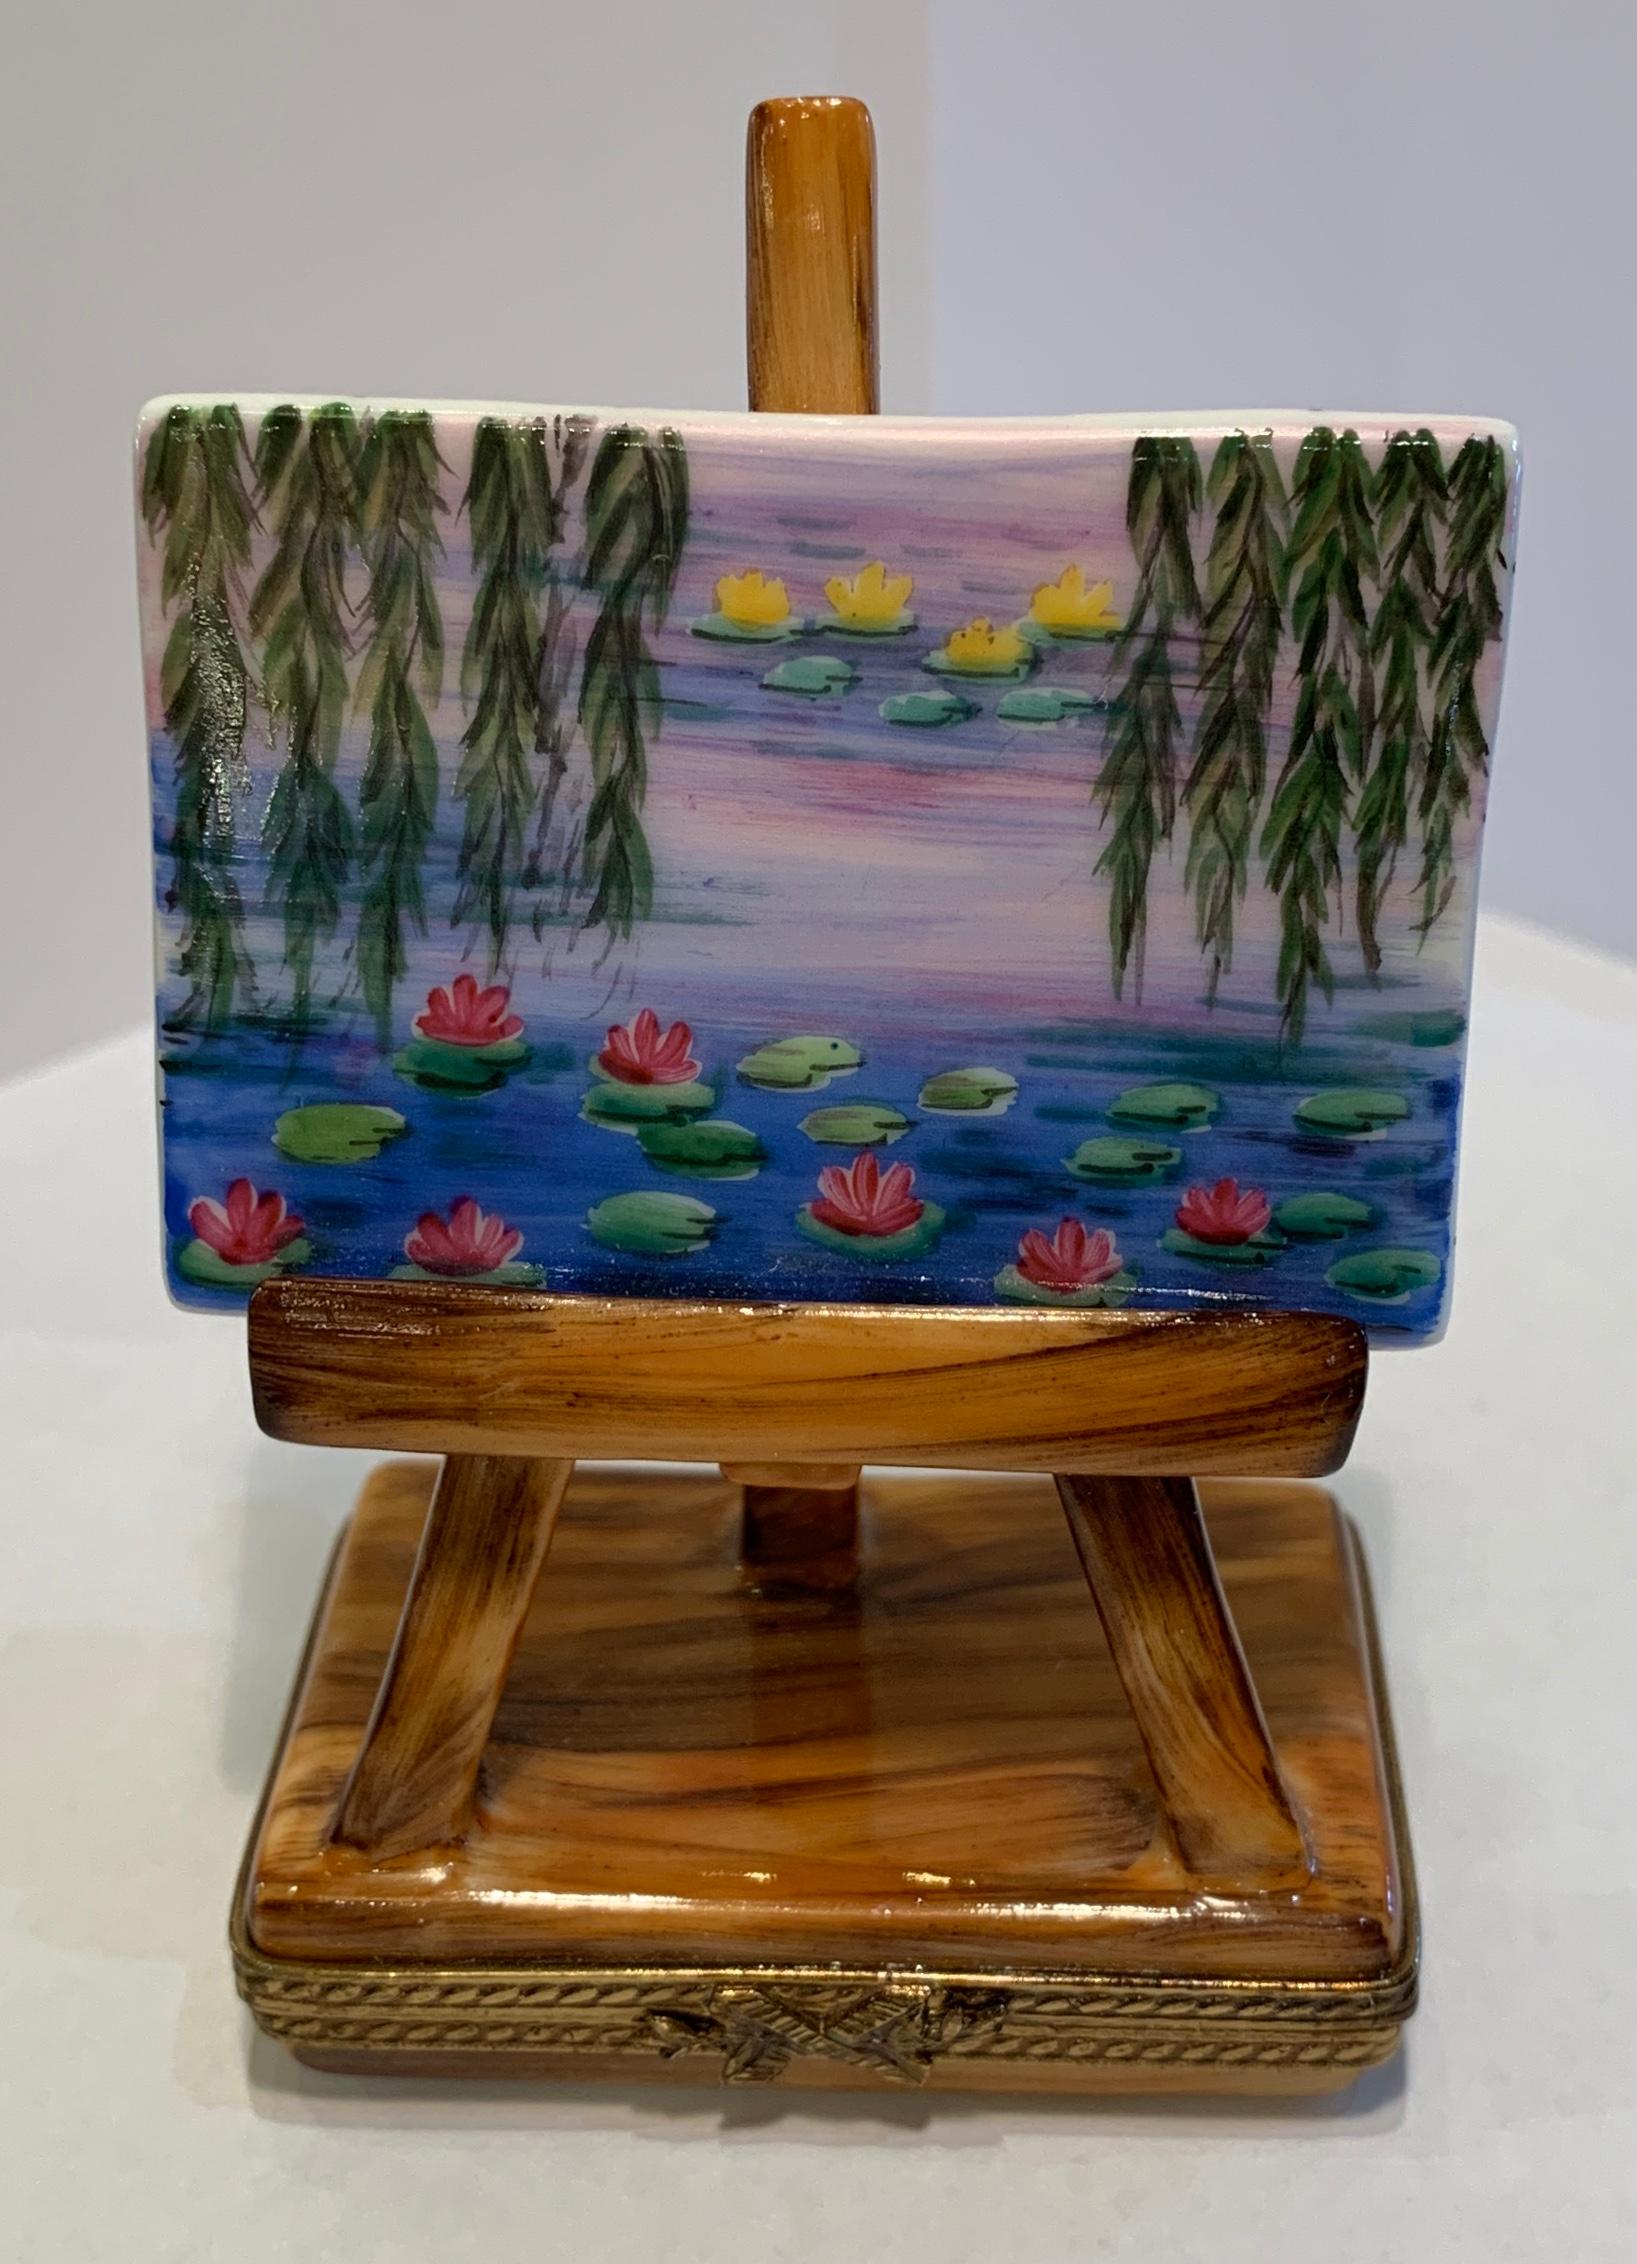 Collectible, limited edition Limoges porcelain miniature trinket box is handmade and hand painted and depicts a Claude Monet waterlily (or “Nympheas” in French) painting on an artists’ easel, the base of which is a shallow box. Claude Monet (1840 –